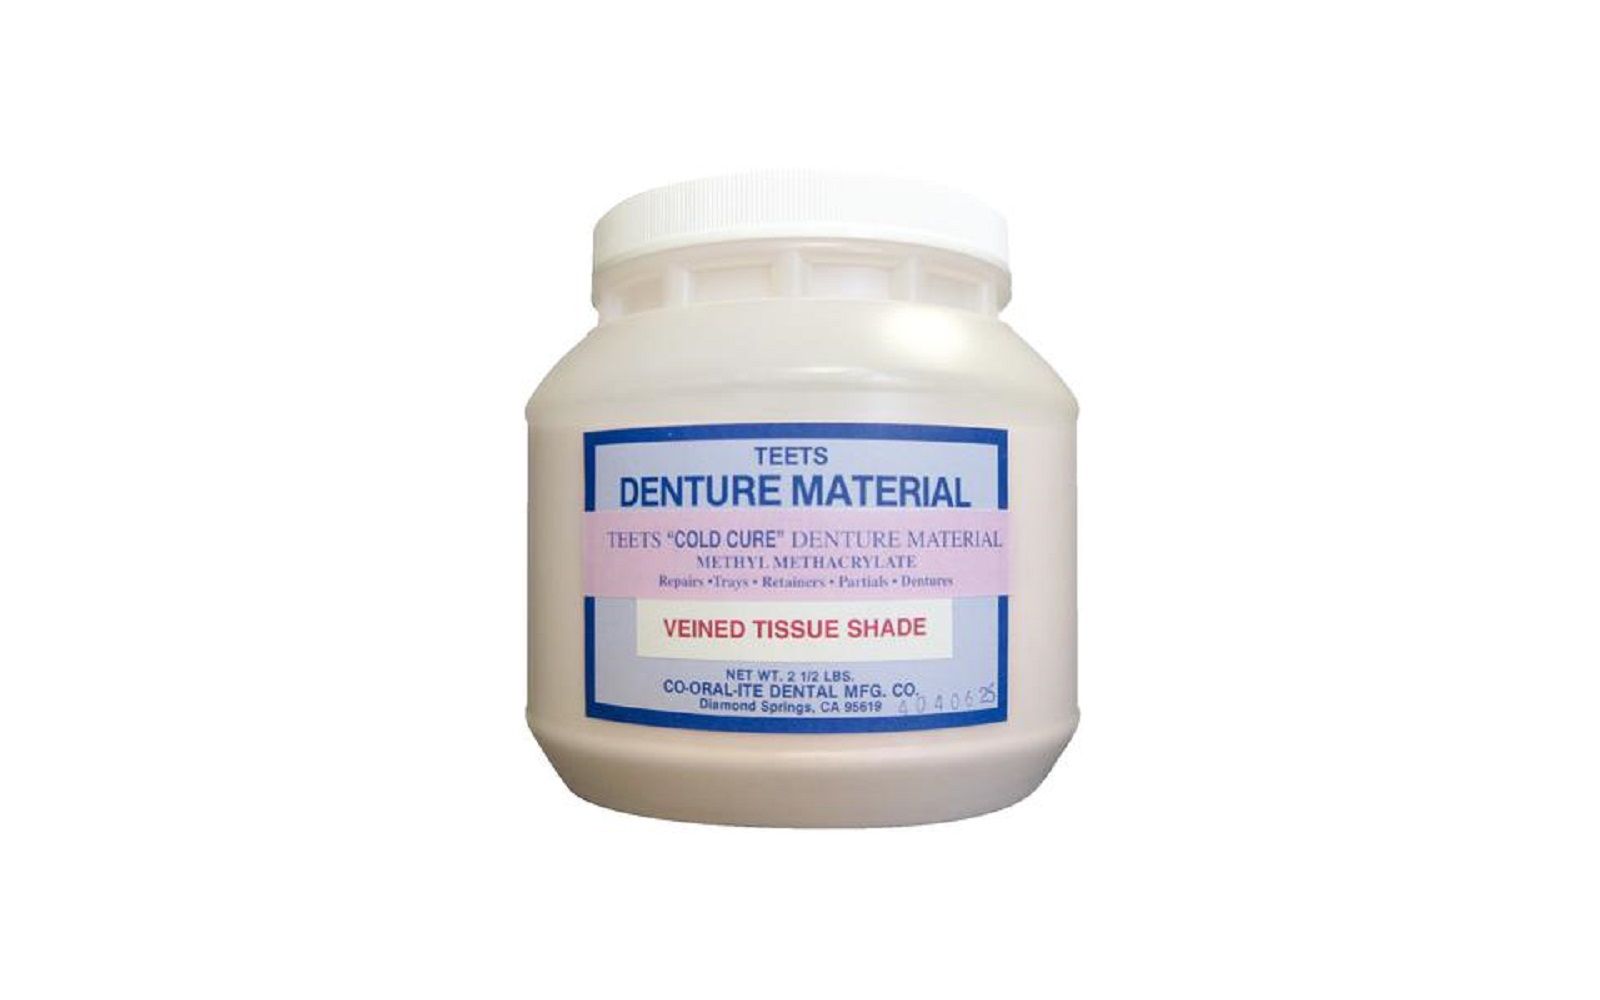 Teets denture material – cold cure, powder and liquid - cooralite dental manufacturing